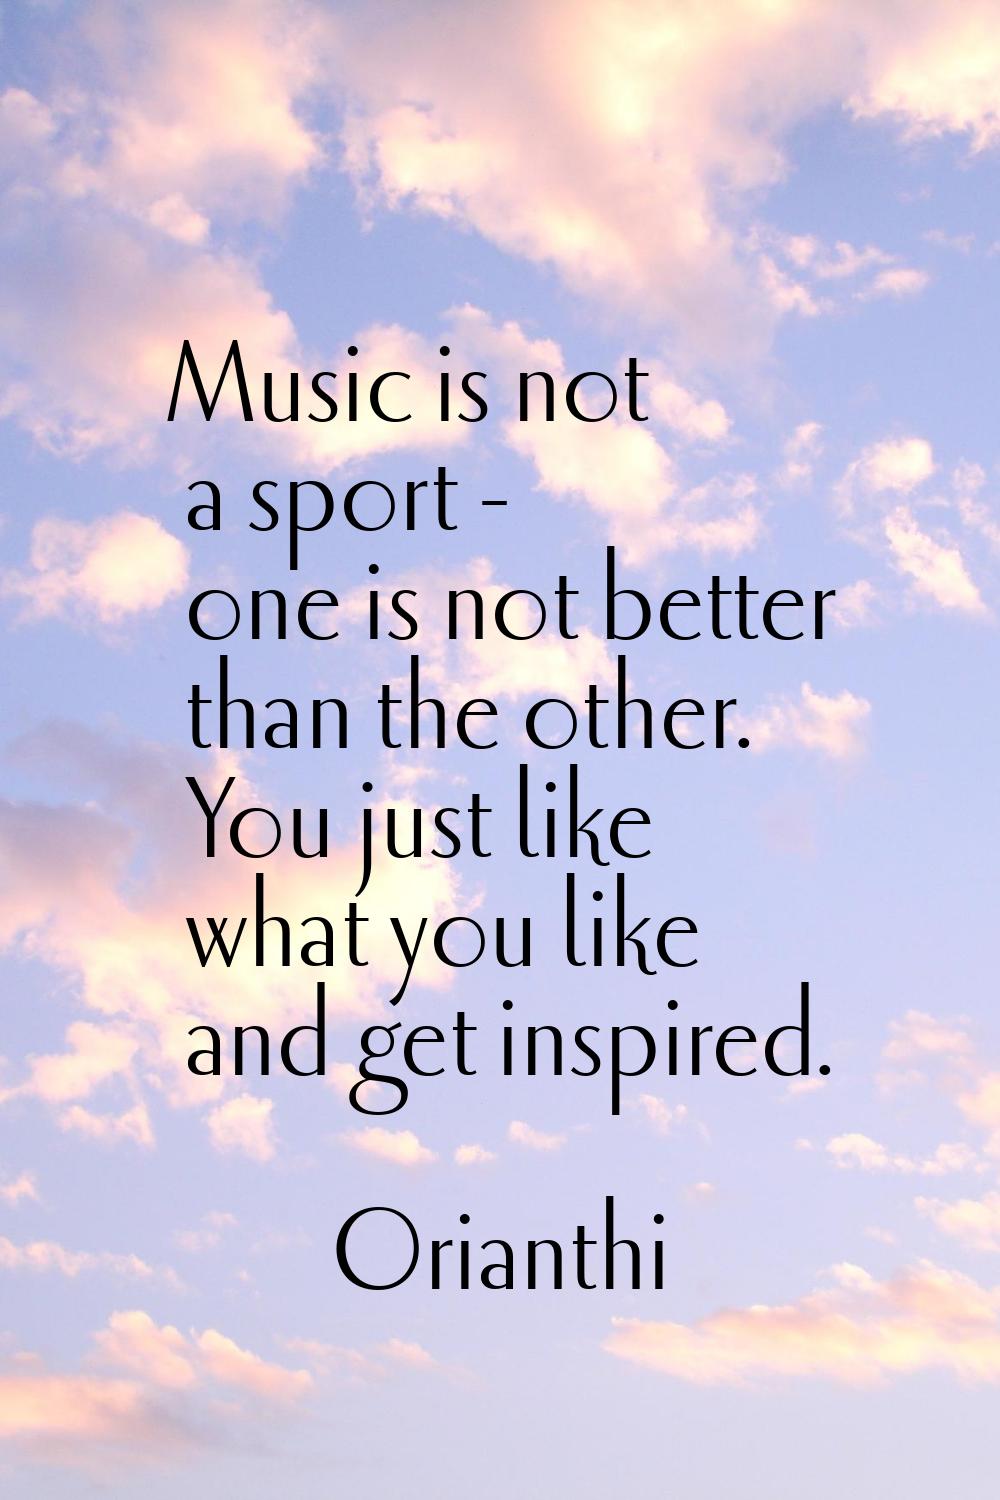 Music is not a sport - one is not better than the other. You just like what you like and get inspir